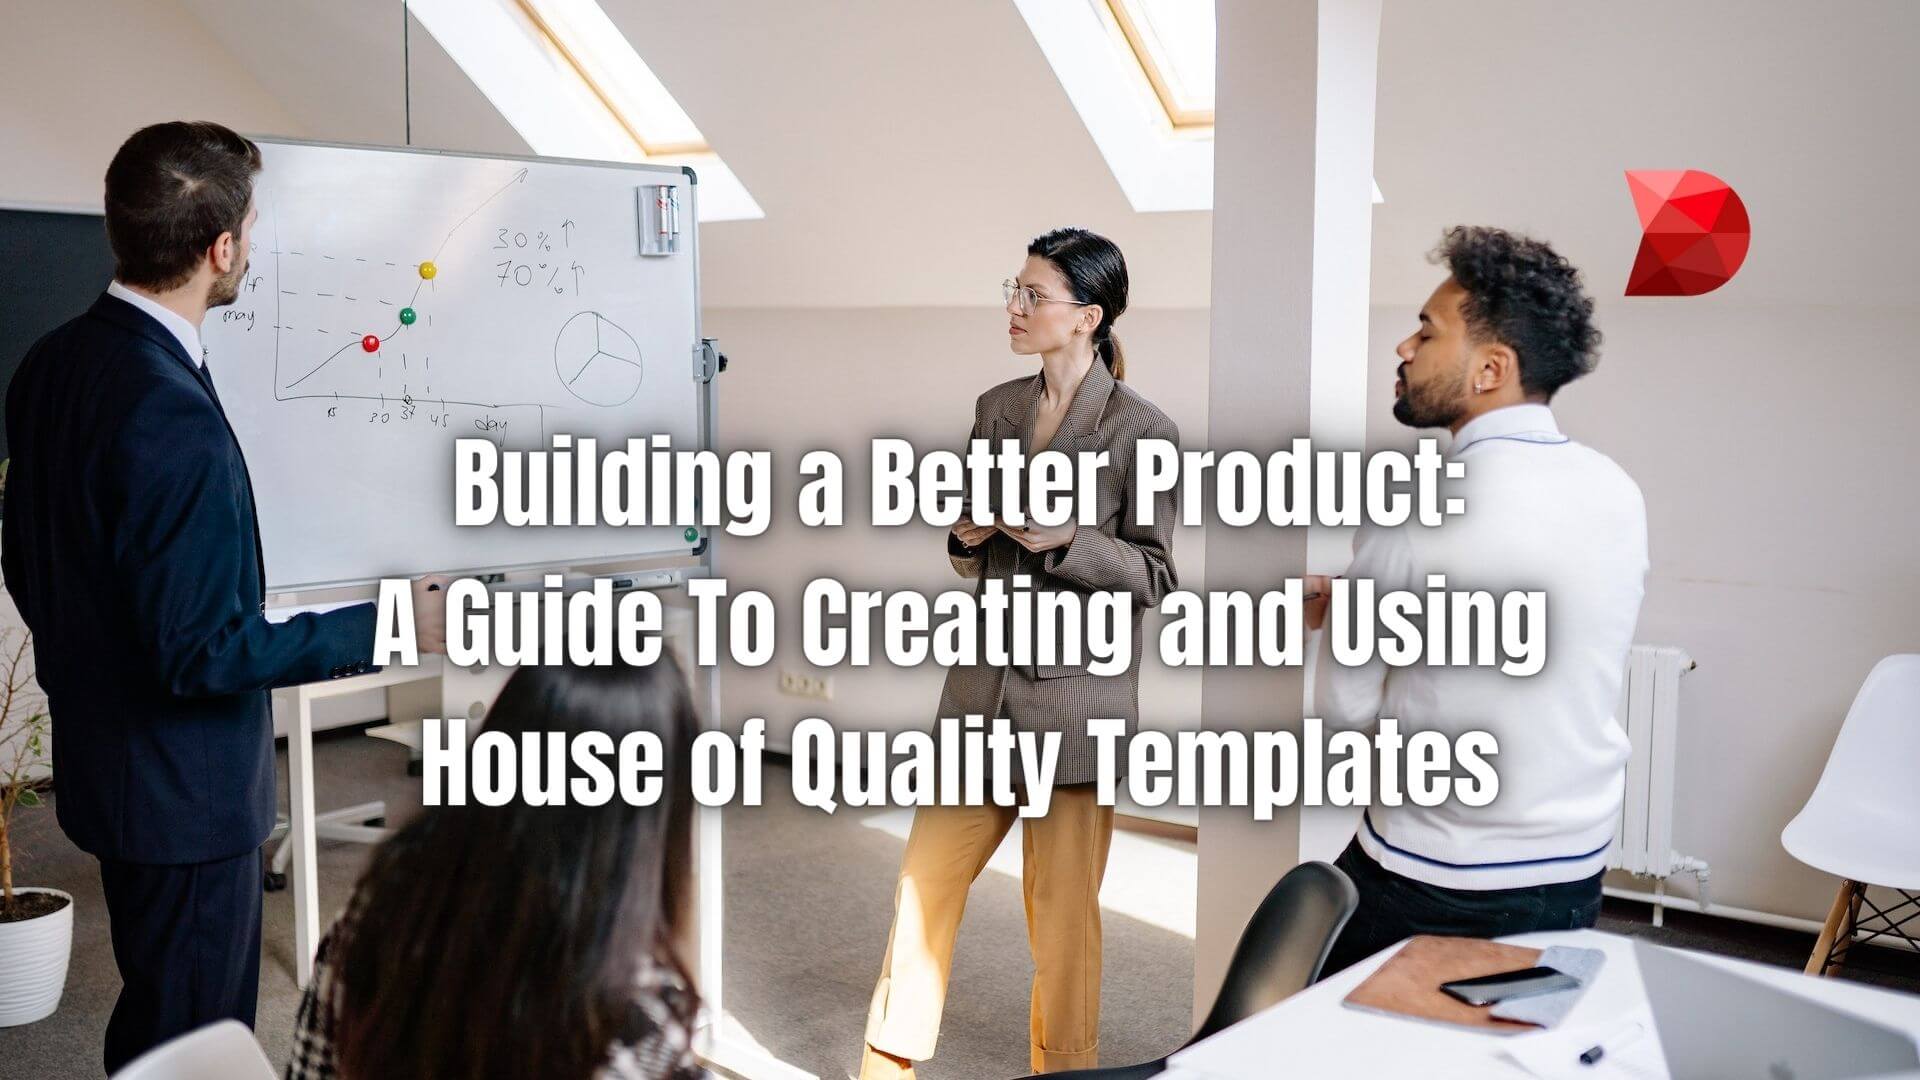 guide-to-creating-and-using-house-of-quality-template-datamyte